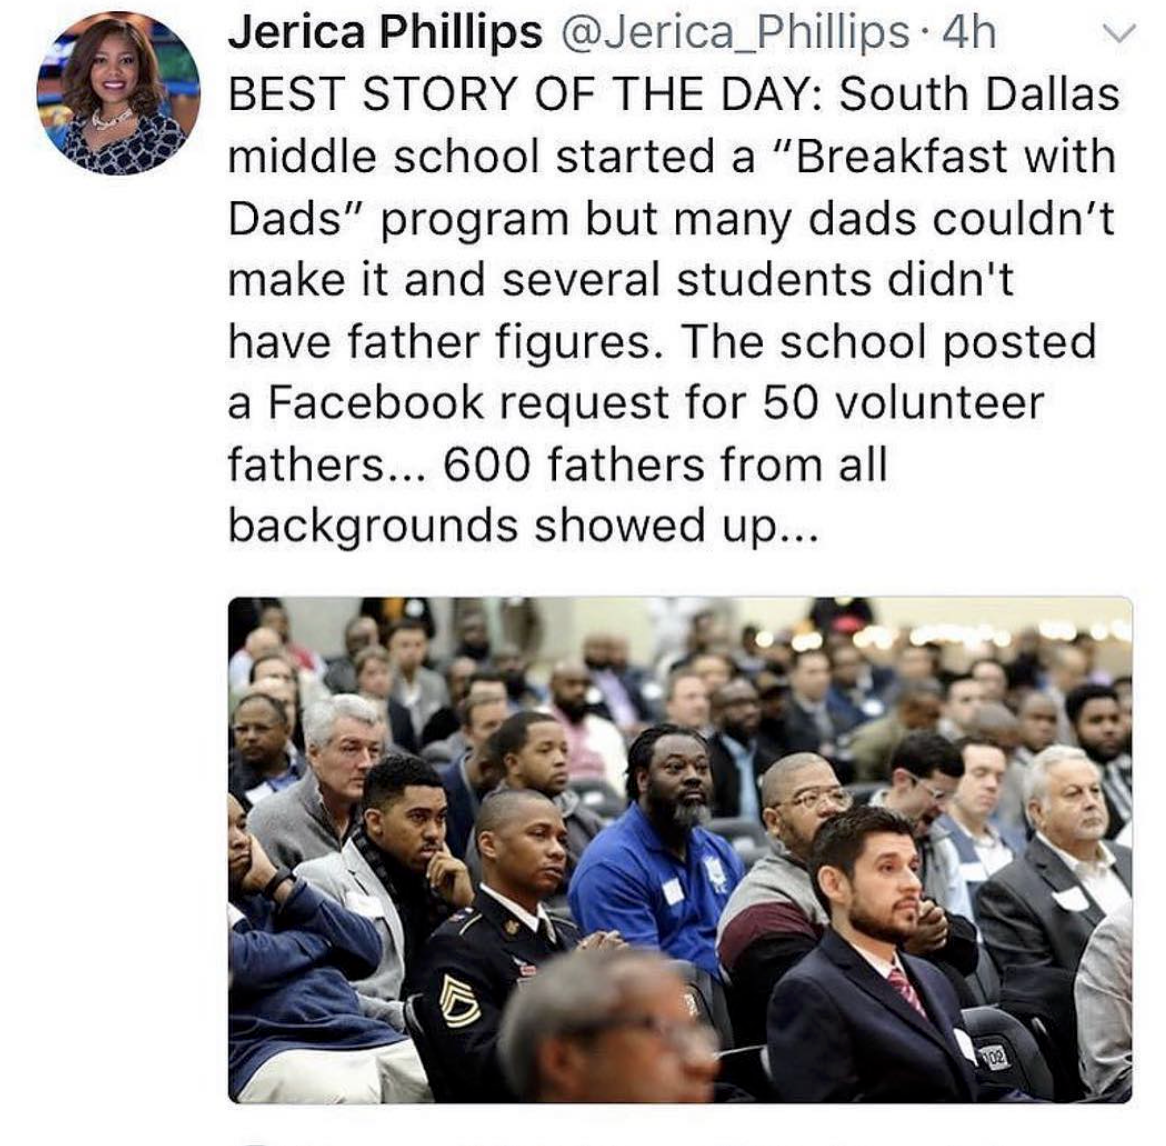 south dallas middle school breakfast with dads - Jerica Phillips . 4h Best Story Of The Day South Dallas middle school started a "Breakfast with Dads" program but many dads couldn't make it and several students didn't have father figures. The school poste